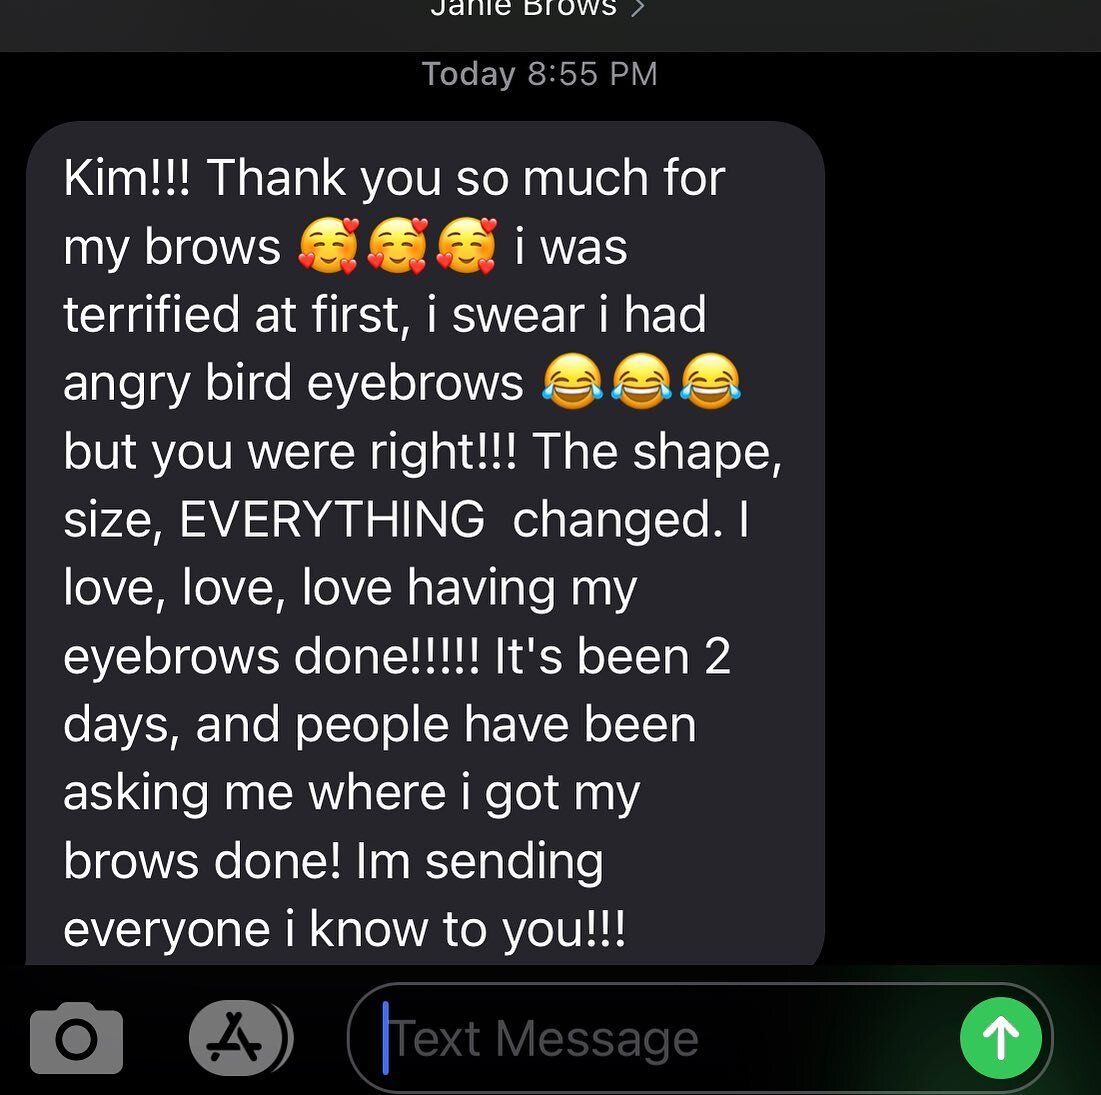 Dear My future clients!
Permanent makeup is a 2 steps procedure. You will go through healing process and they wont look great just like my Janie here, she thought she looked like angry birds 😁🦢. Trust me, it will be more natural, softer and after t